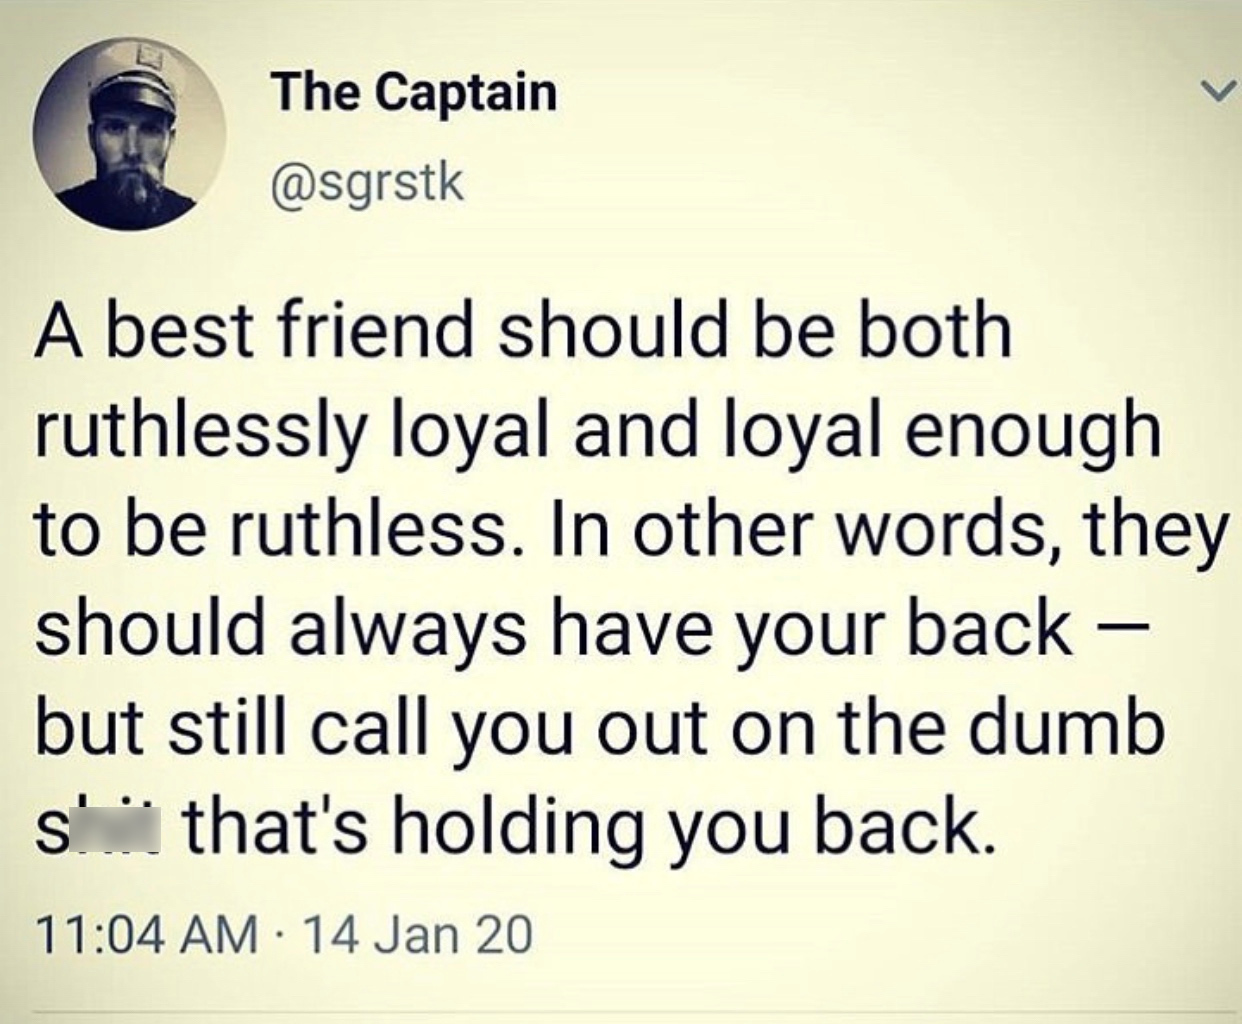 writing - The Captain A best friend should be both ruthlessly loyal and loyal enough to be ruthless. In other words, they should always have your back but still call you out on the dumb s' that's holding you back. 14 Jan 20